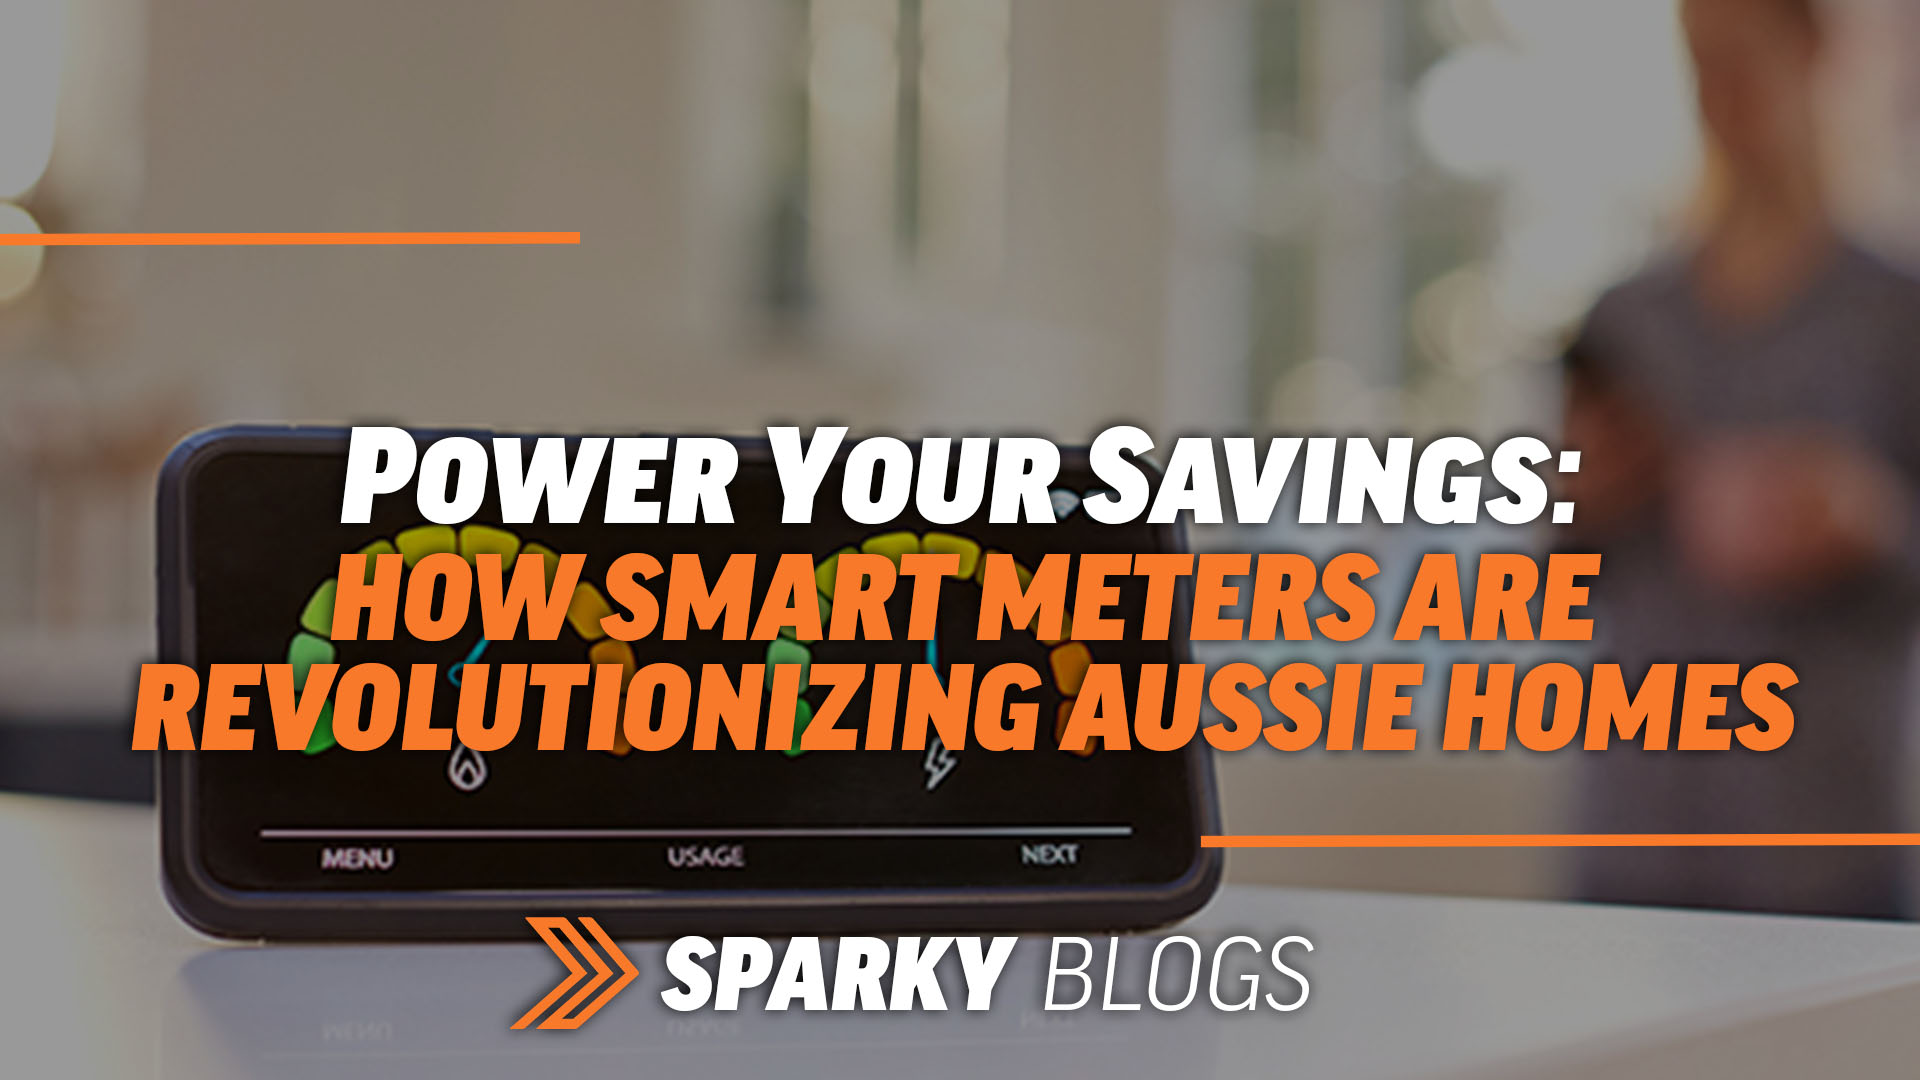 Power Your Savings: How Smart Meters Are Revolutionizing Aussie Homes image